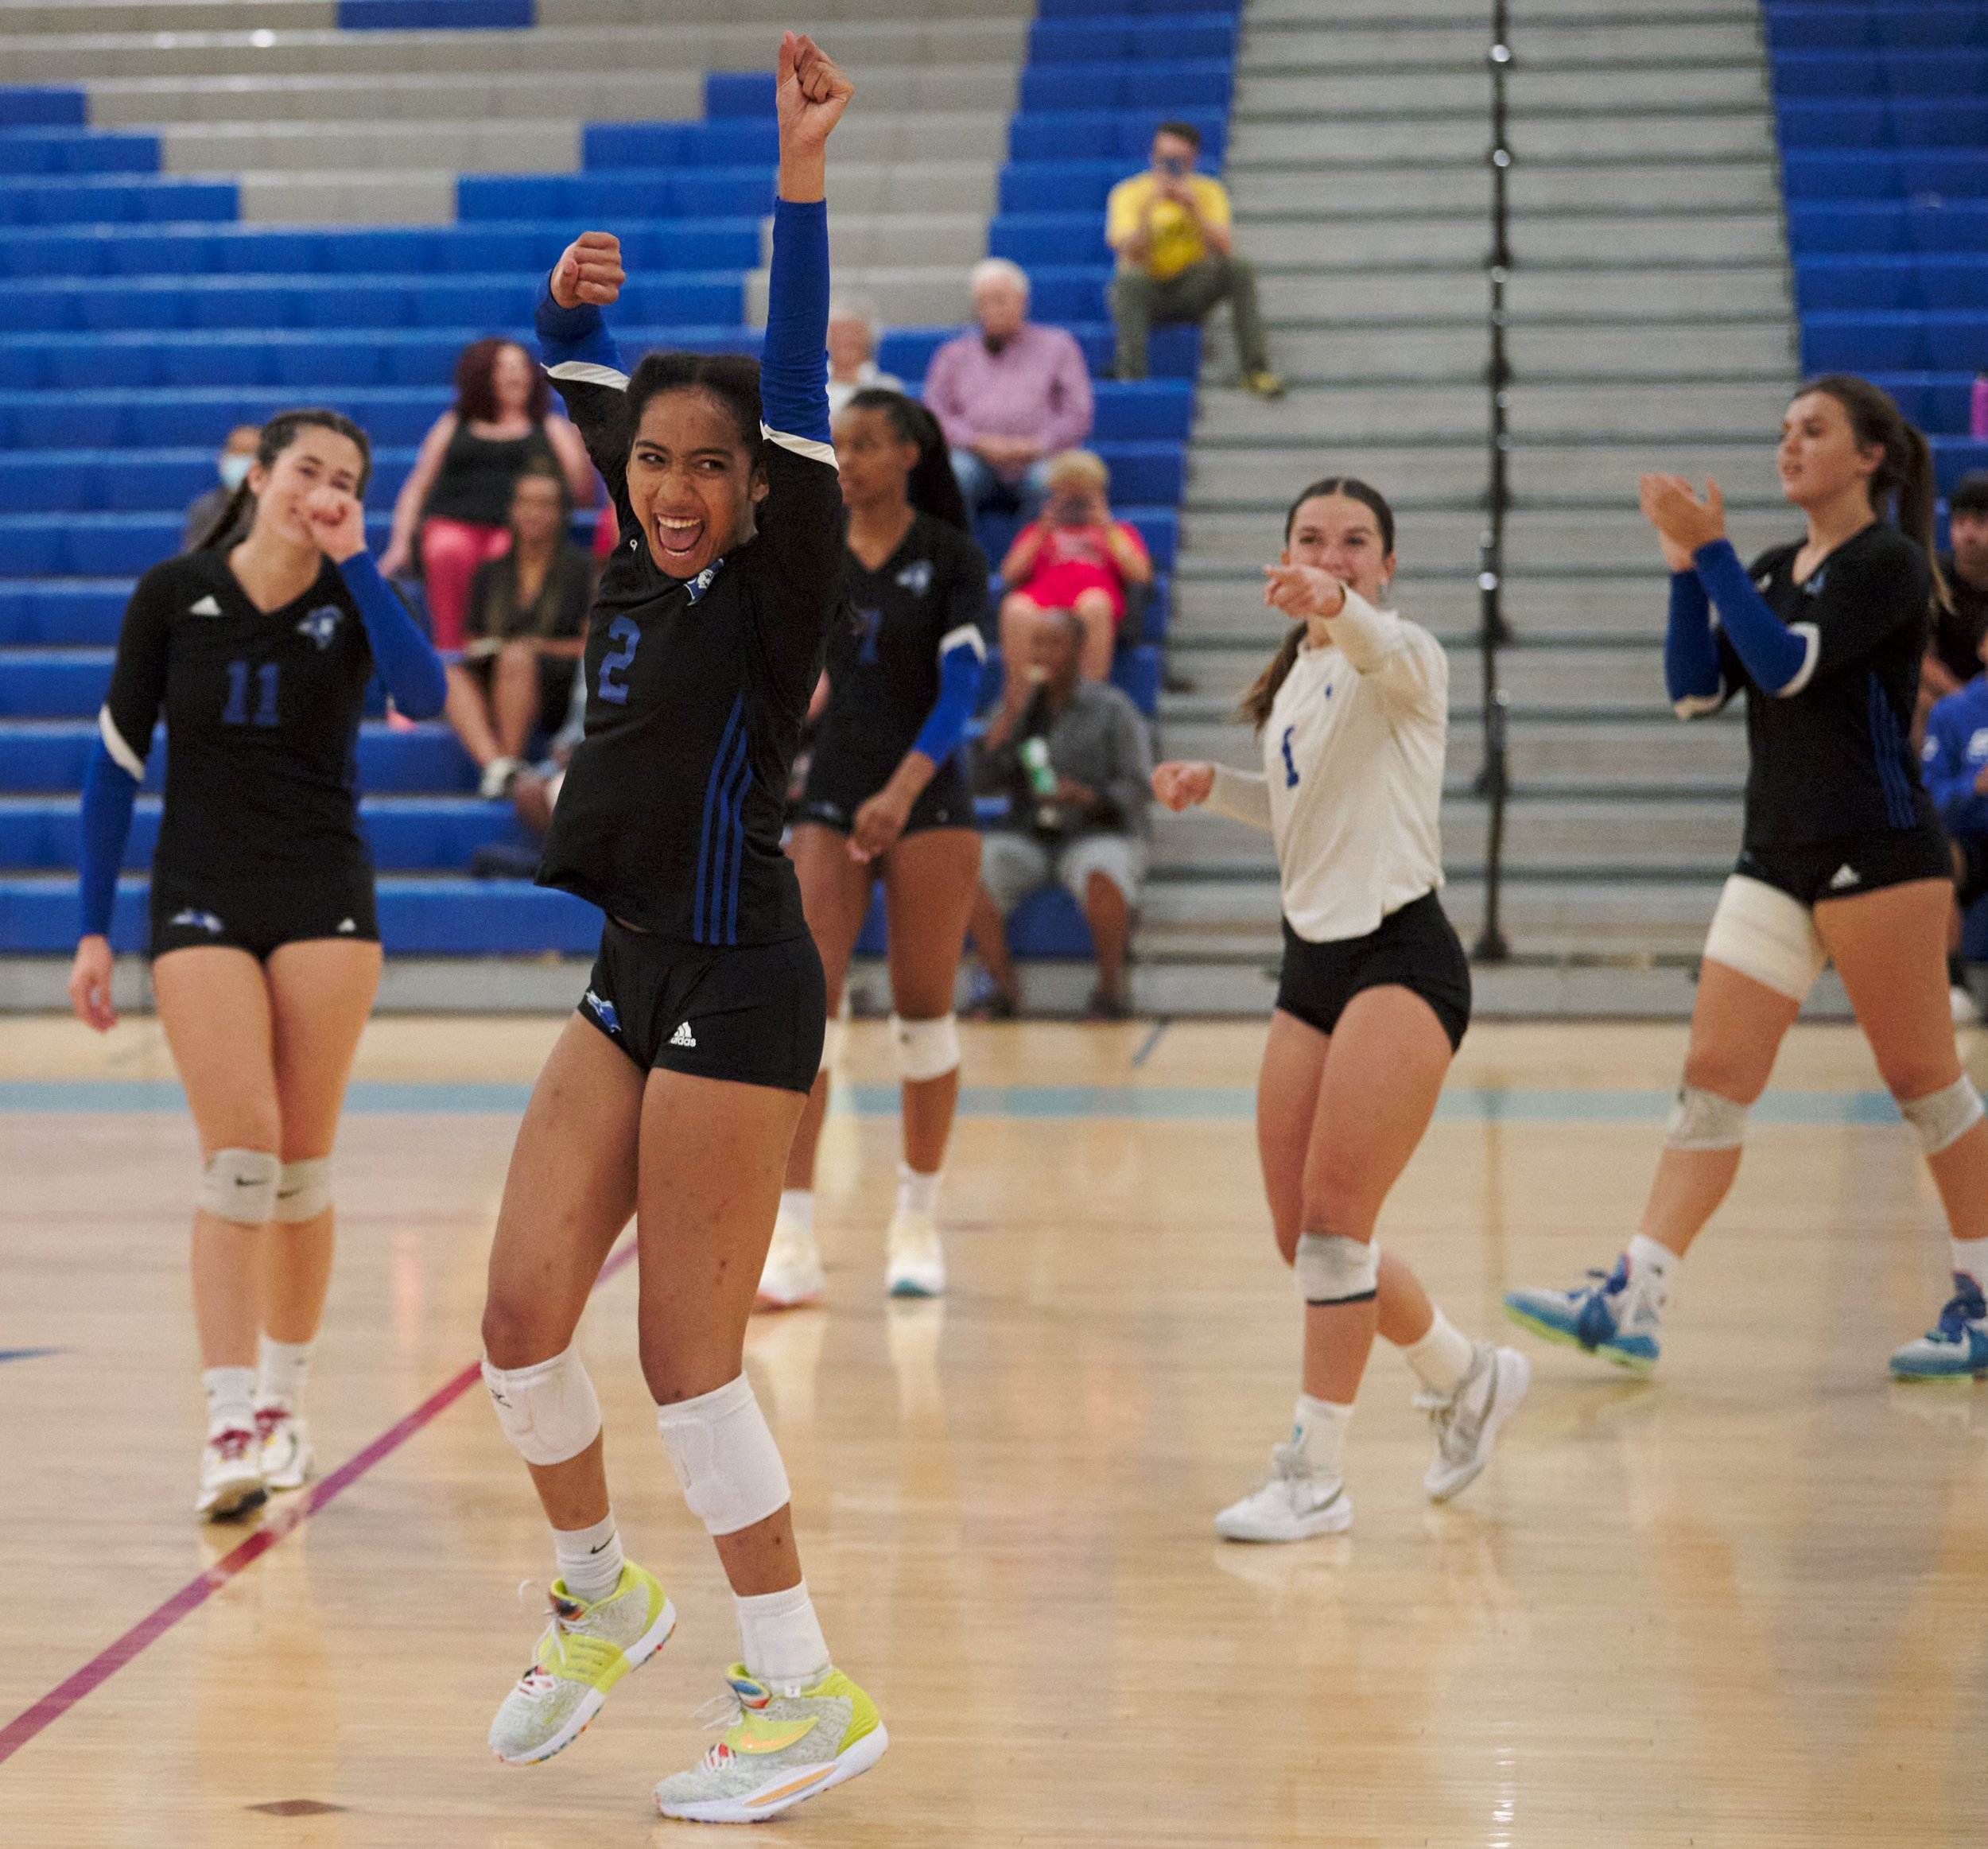  Members of the Santa Monica College Corsairs Women's Volleyball team, Maiella Riva, Amaya Bernardo, Zarha Stanton, Halle Anderson, and Mackenzie Wolff, celebrate after scoring during the match against the Bakersfield College Renegades on Wednesday, 